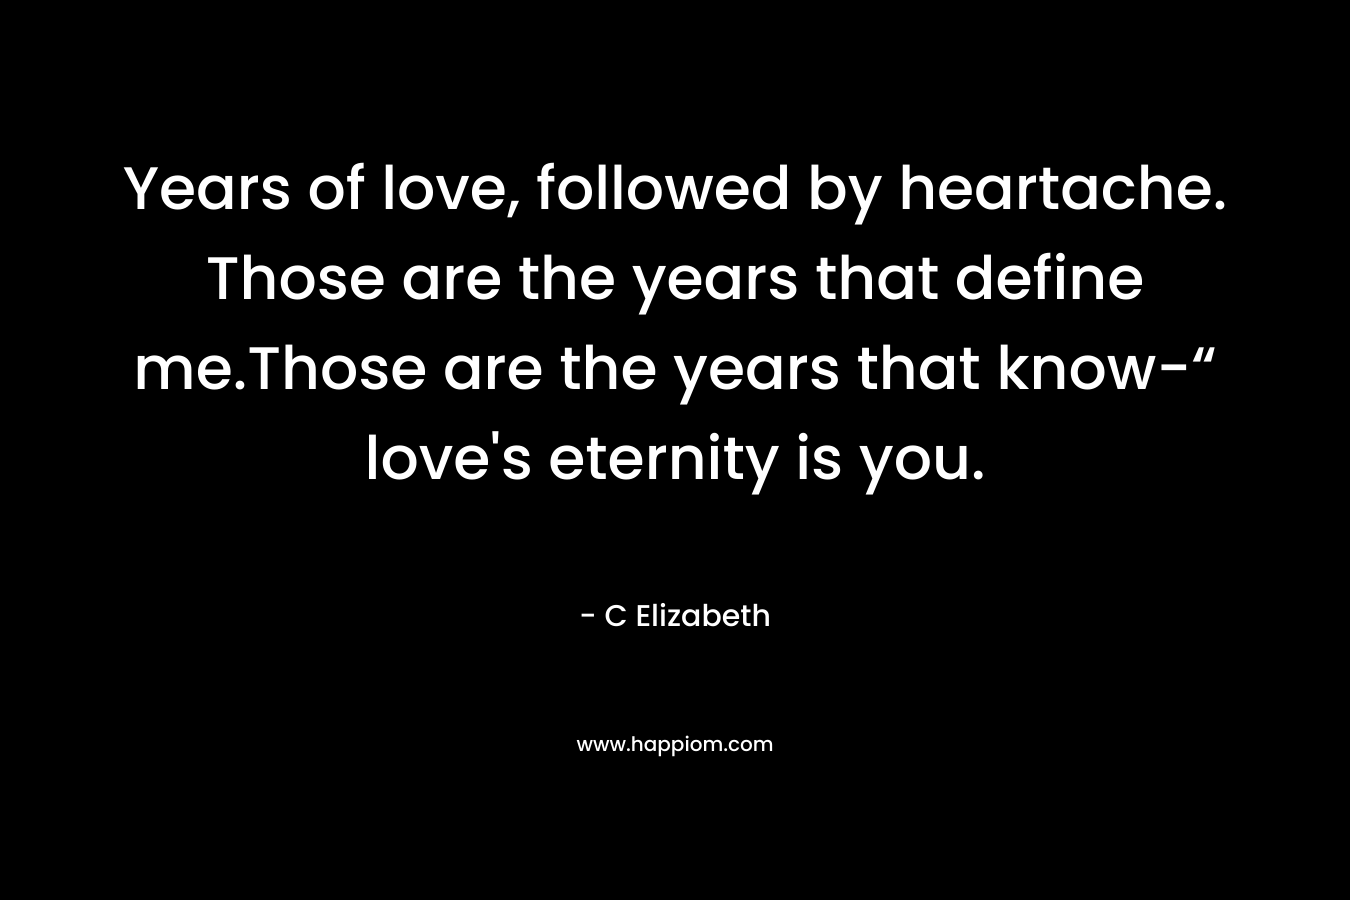 Years of love, followed by heartache. Those are the years that define me.Those are the years that know-“ love's eternity is you.